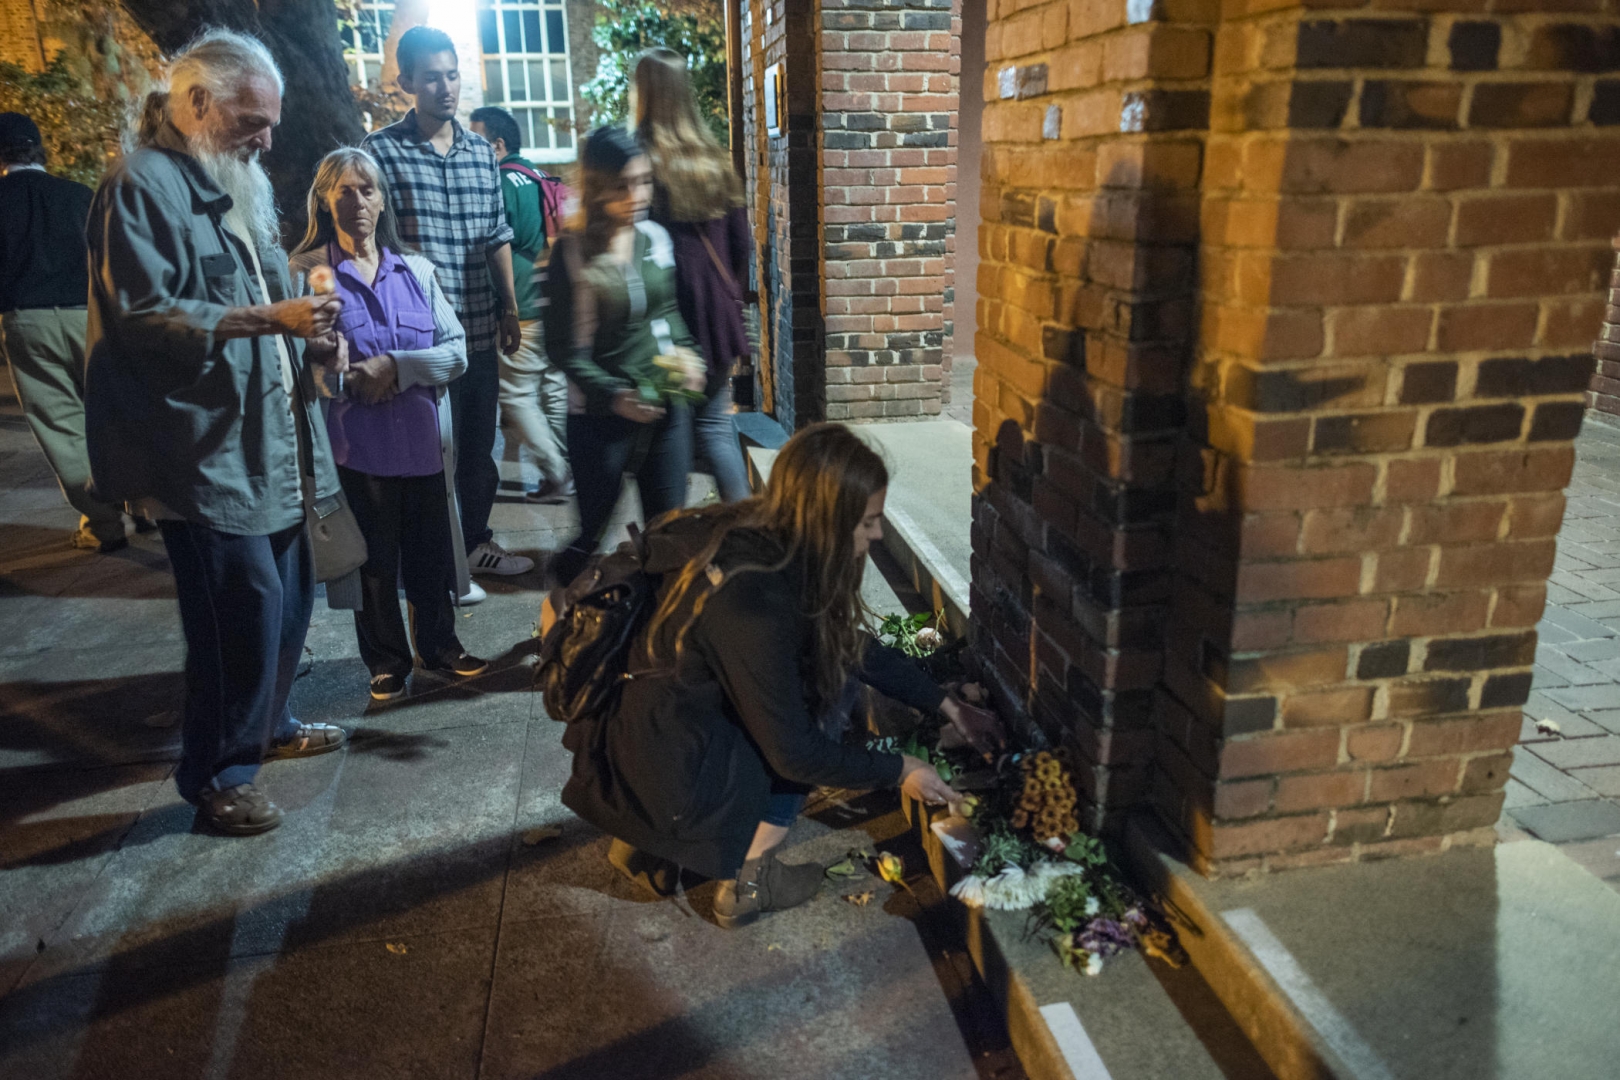 A group of several people somberly pay respects with notes and flowers in front of a brick pillar by Kendall Hall.